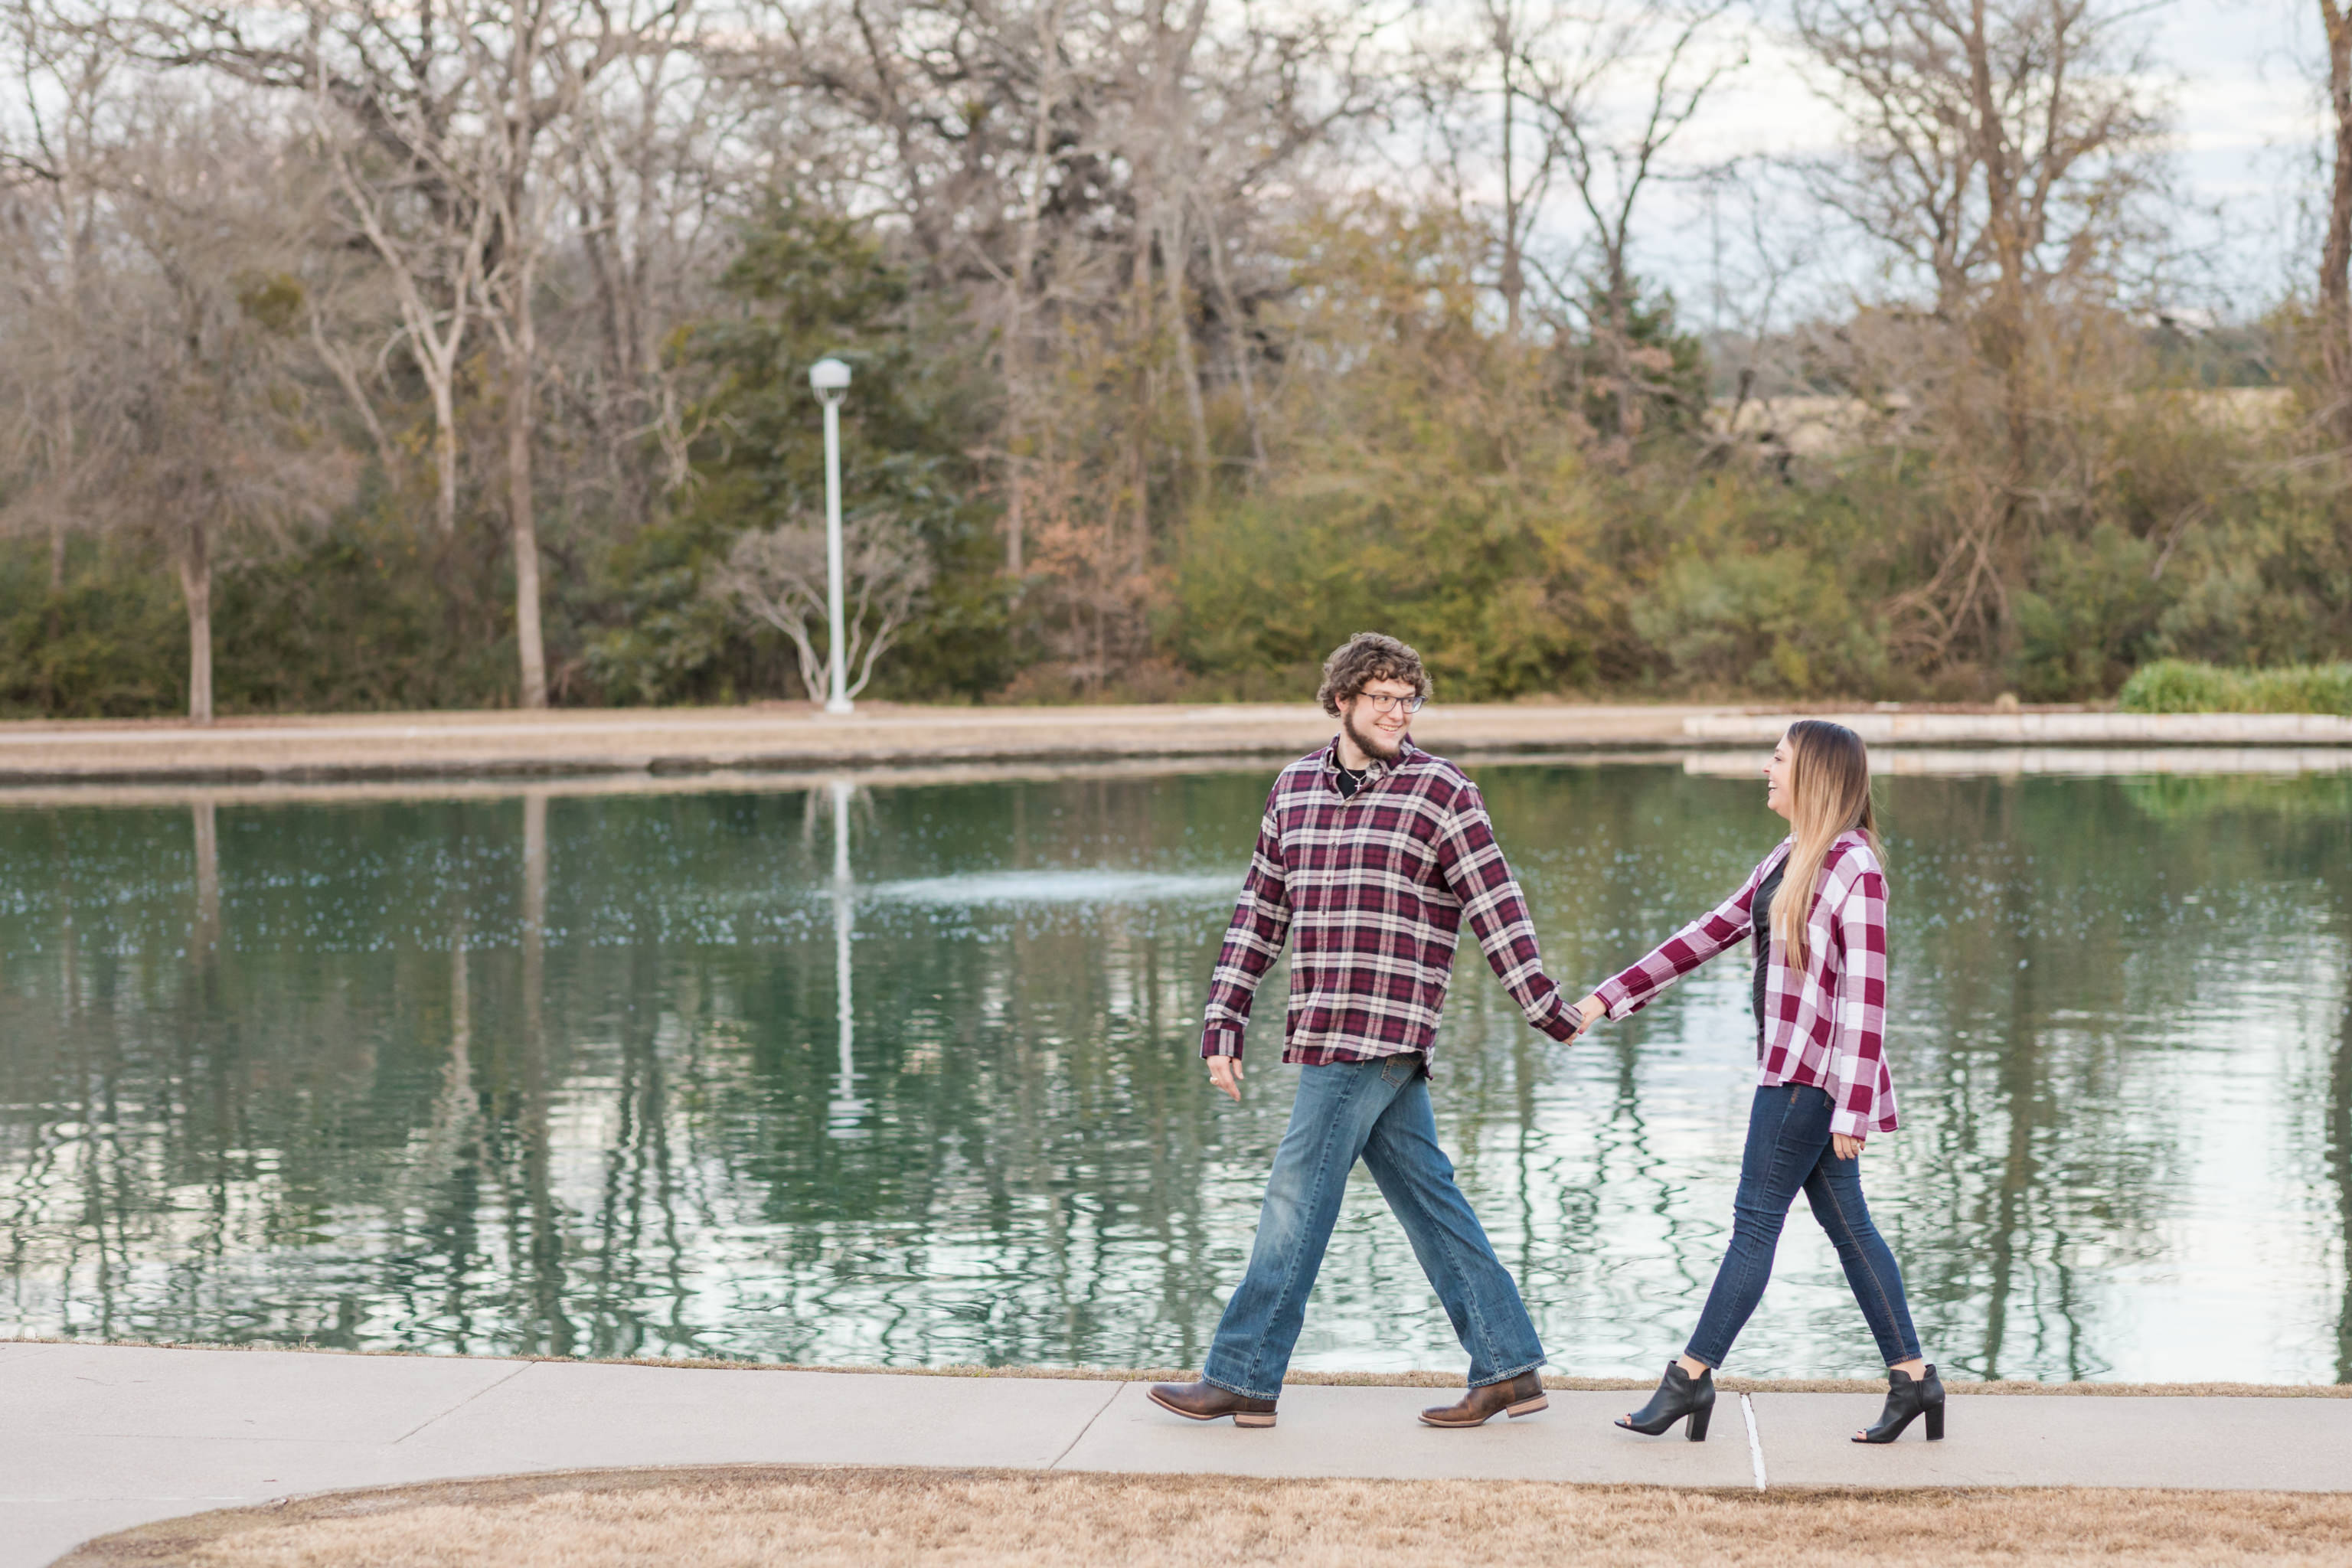 An Engagement Session at Texas A&M in College Station, TX by Dawn Elizabeth Studios, San Antonio Wedding Photographer